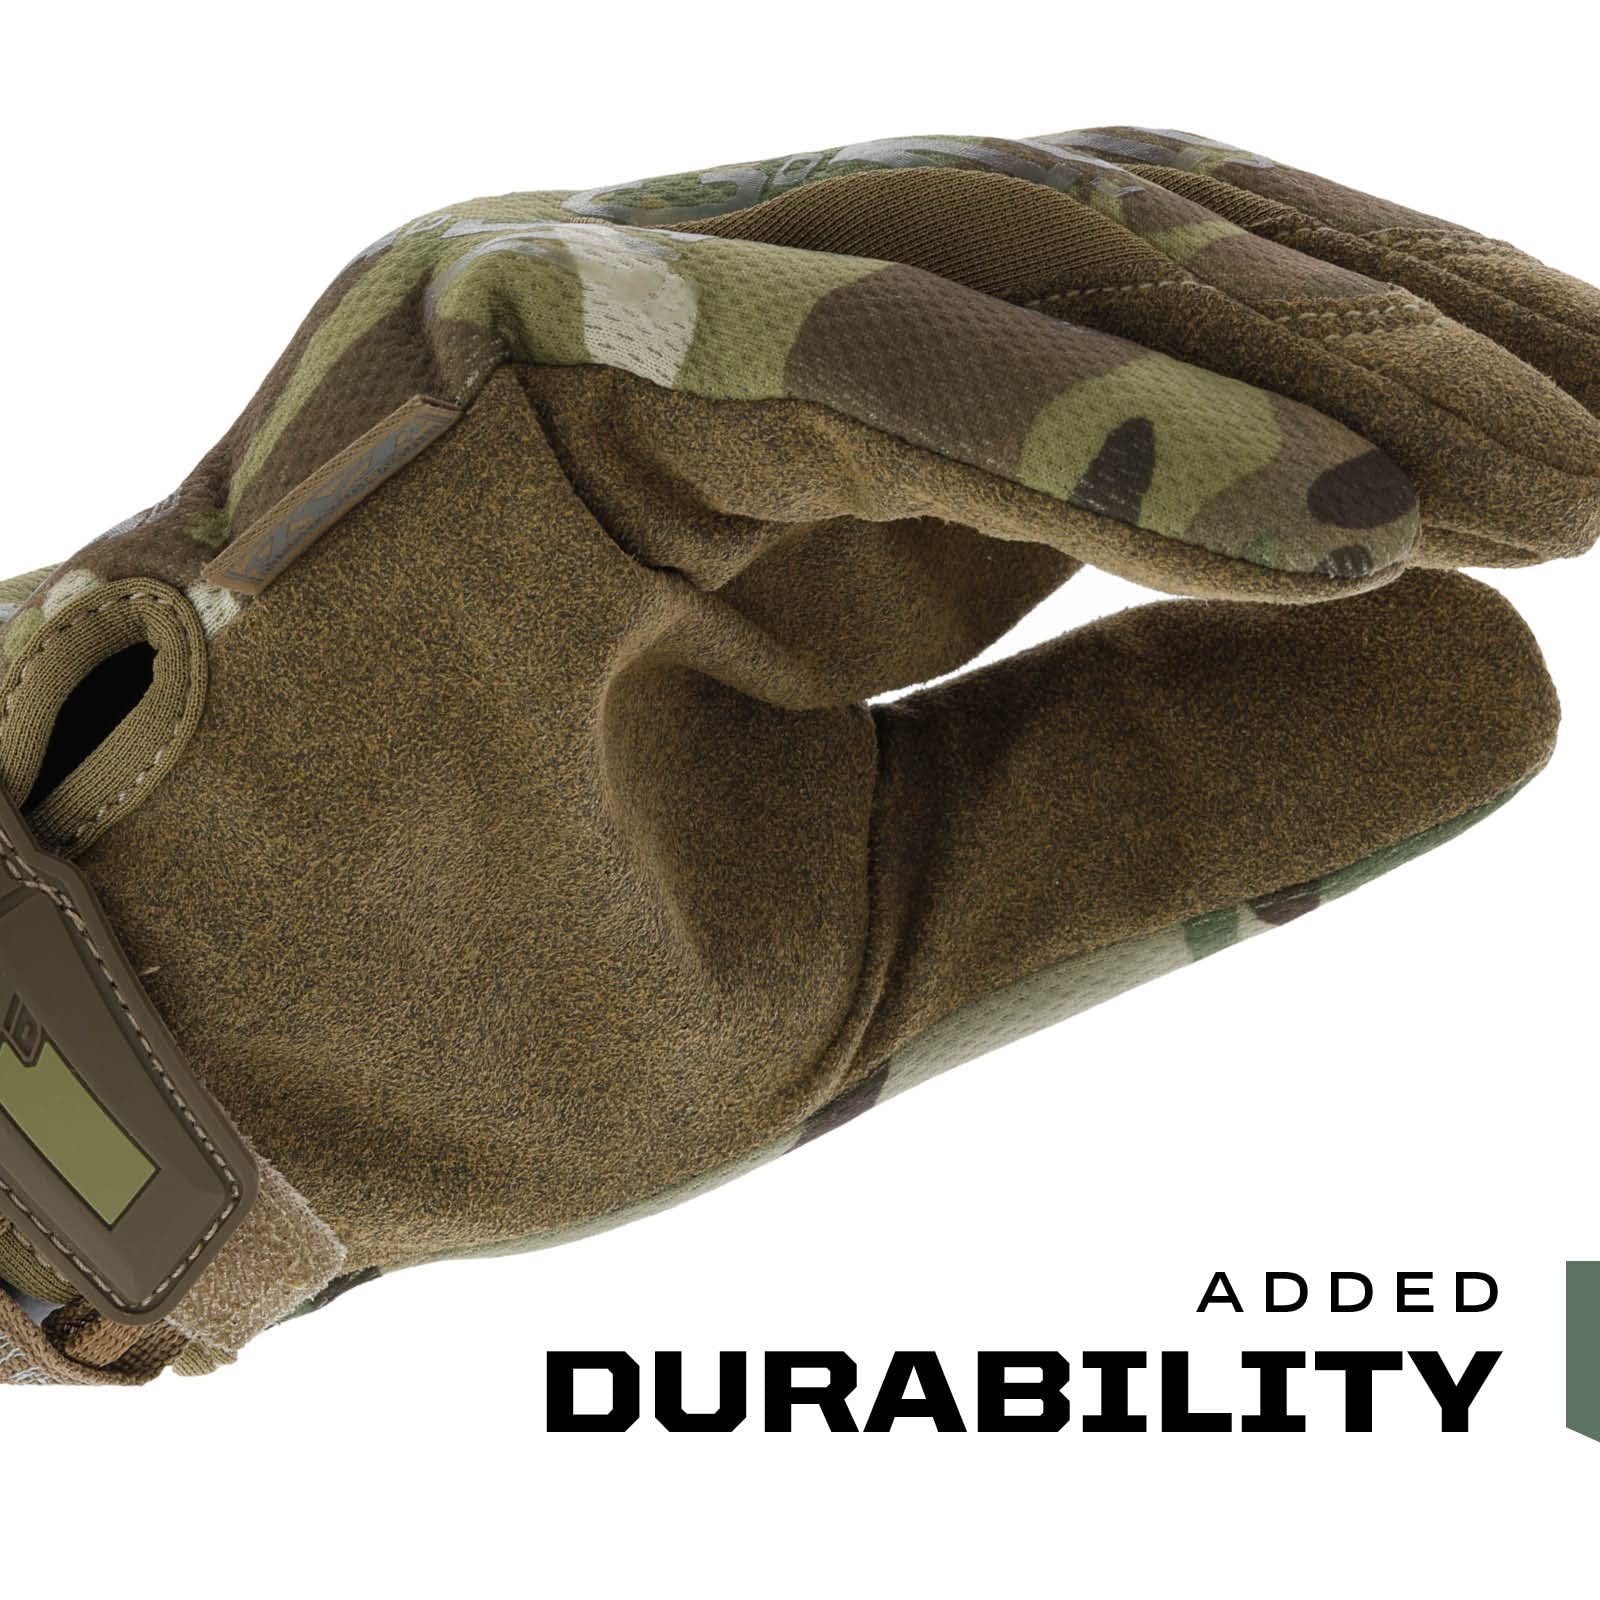 Mechanix Wear: The Original Tactical Work Gloves with Secure Fit, Flexible Grip for Multi-Purpose Use, Durable Touchscreen Safety Gloves for Men (Camouflage - MultiCam, Medium)